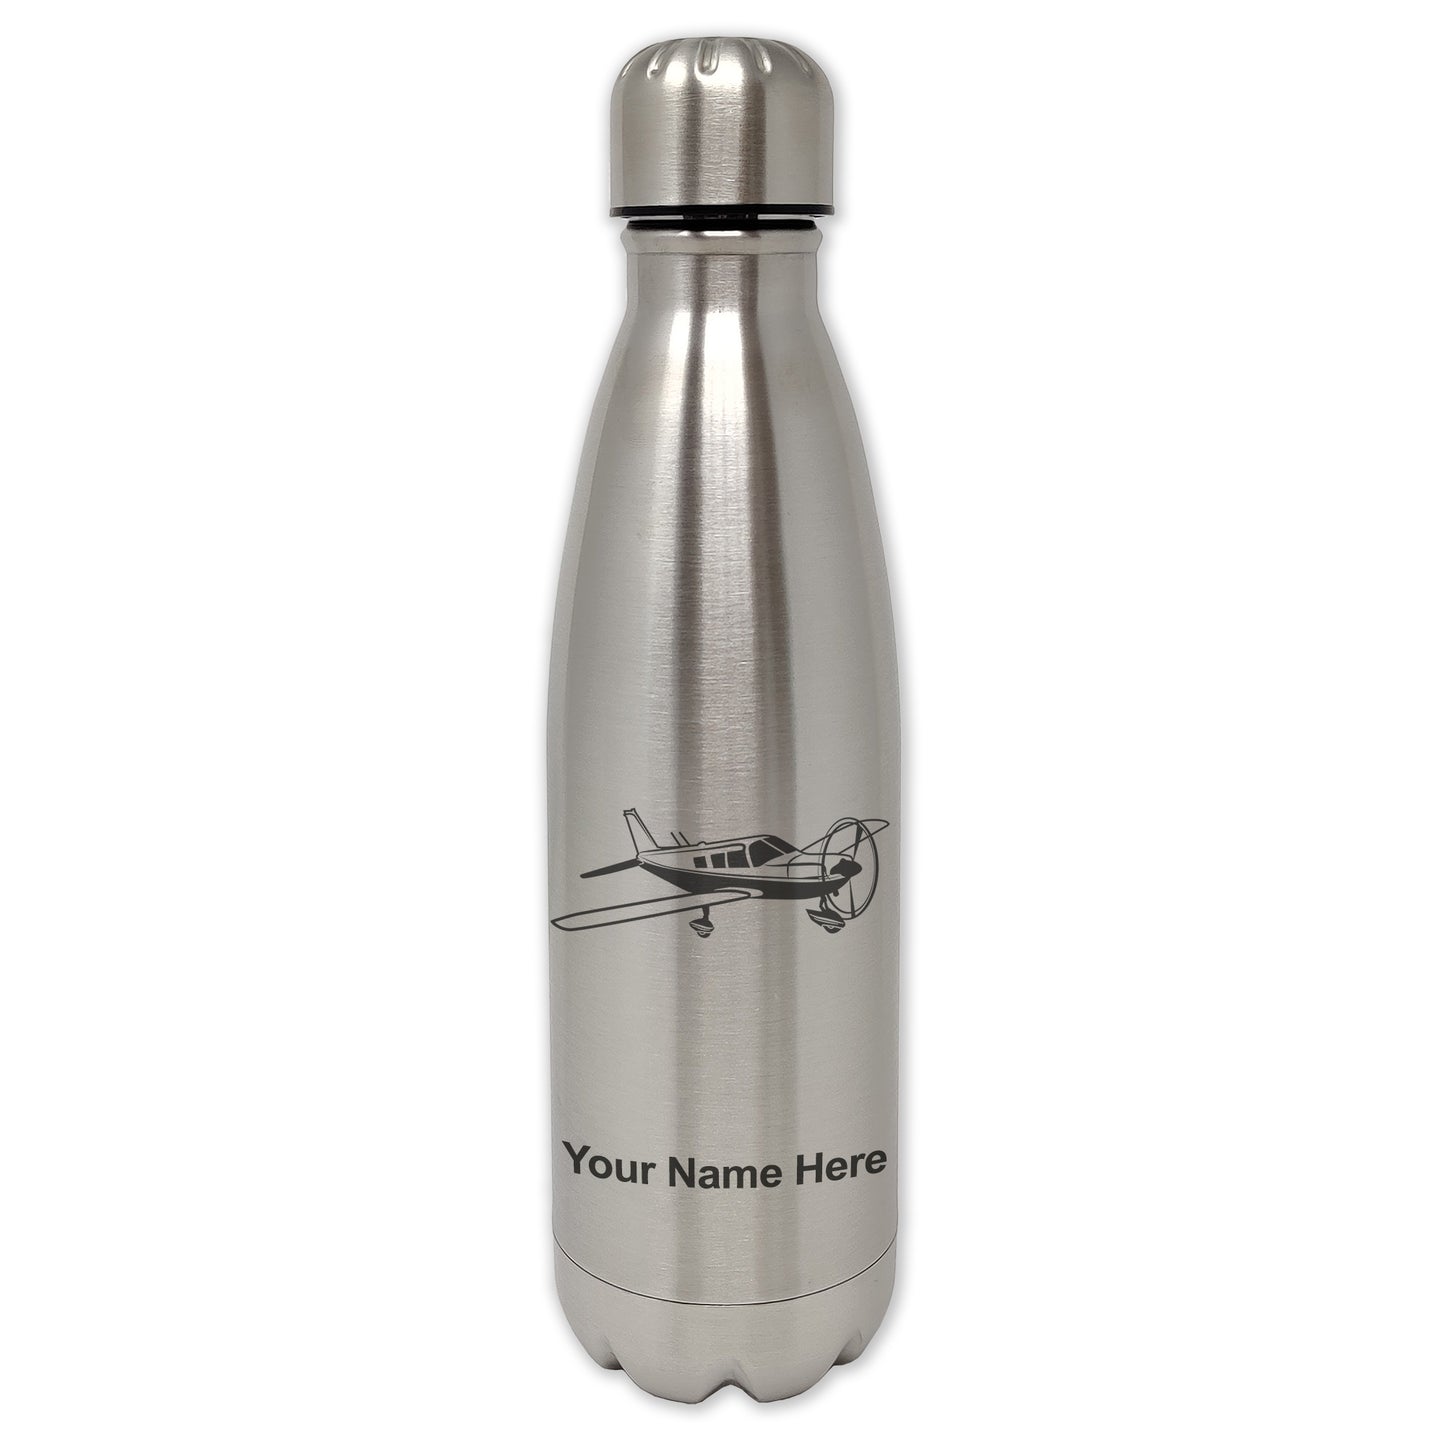 LaserGram Single Wall Water Bottle, Low Wing Airplane, Personalized Engraving Included